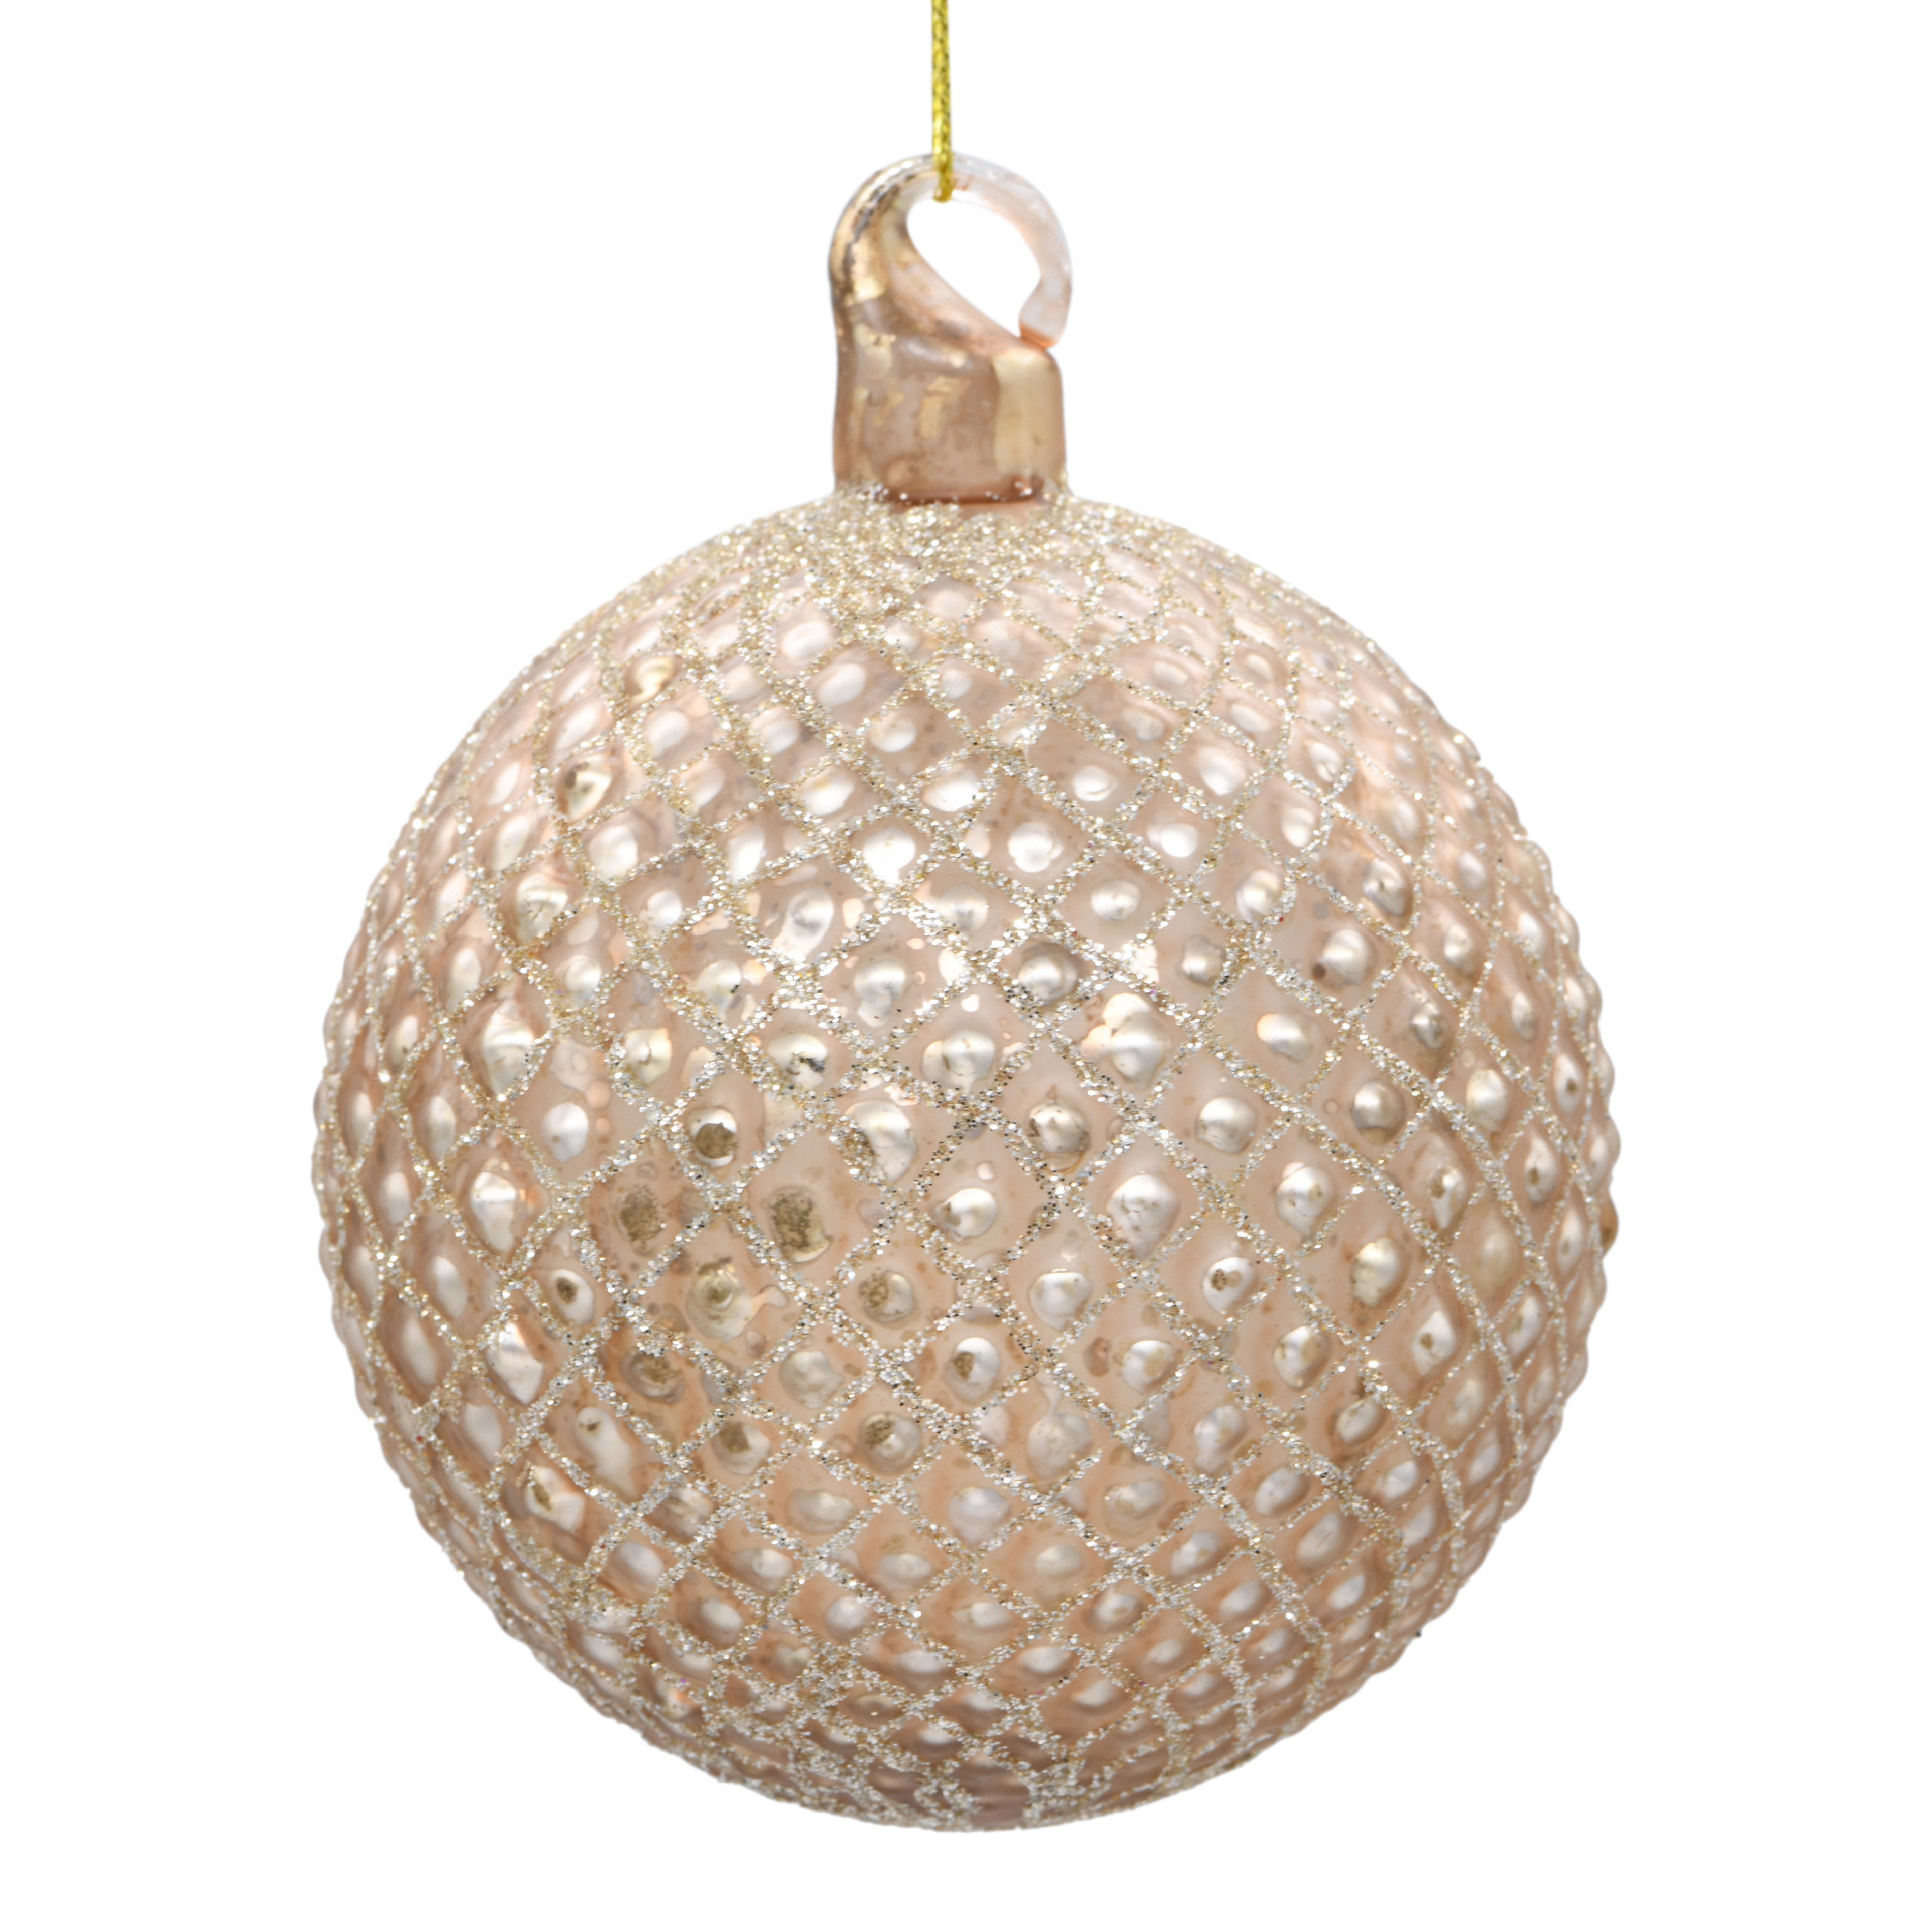 Blush pink Christmas tree ornament on white background